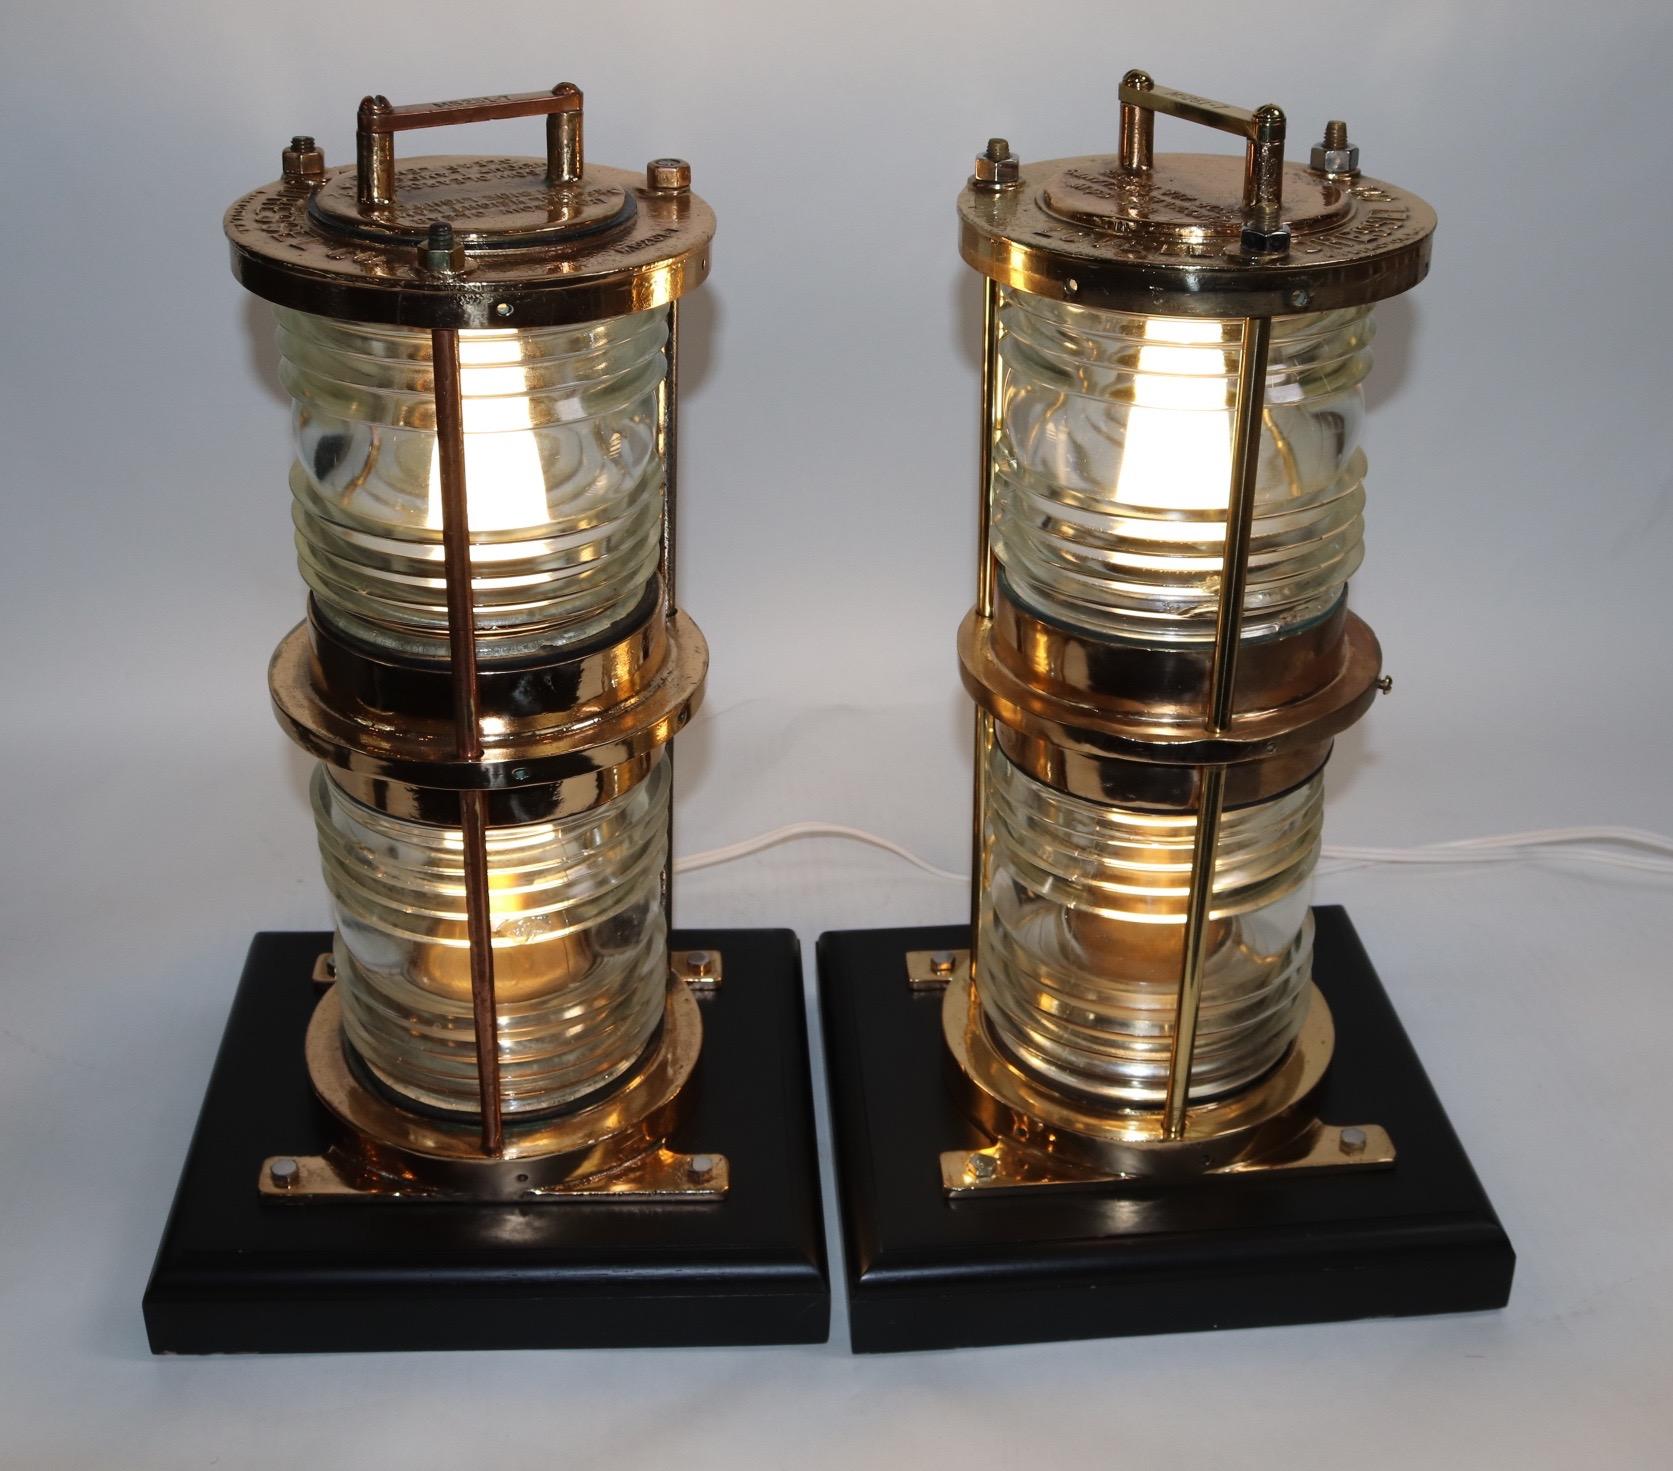 Pair of solid brass maritime beacons with double Fresnel lenses set into heavy brass beacon housings. Both are recently wired for home display and are mounted onto thick wood bases with rich dark finish. Weight is 60 pounds the pair.